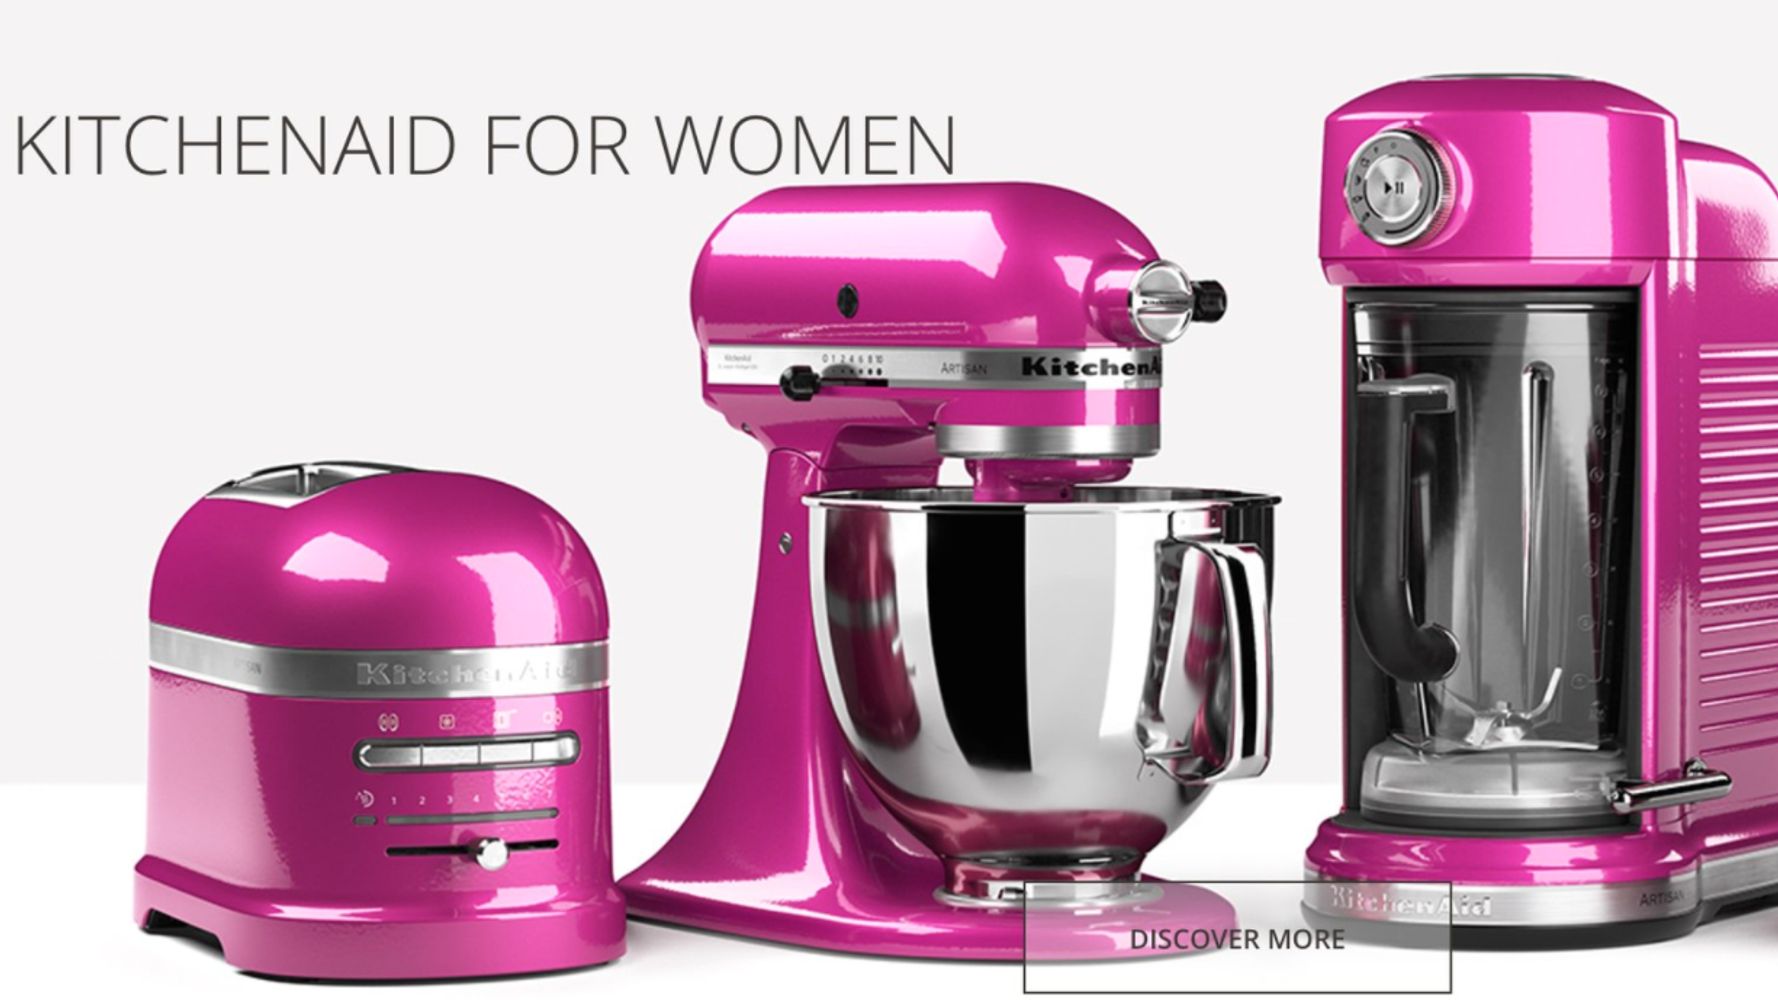 Kitchenaid Called Sexist For Advertising Pink Cooking Appliances For